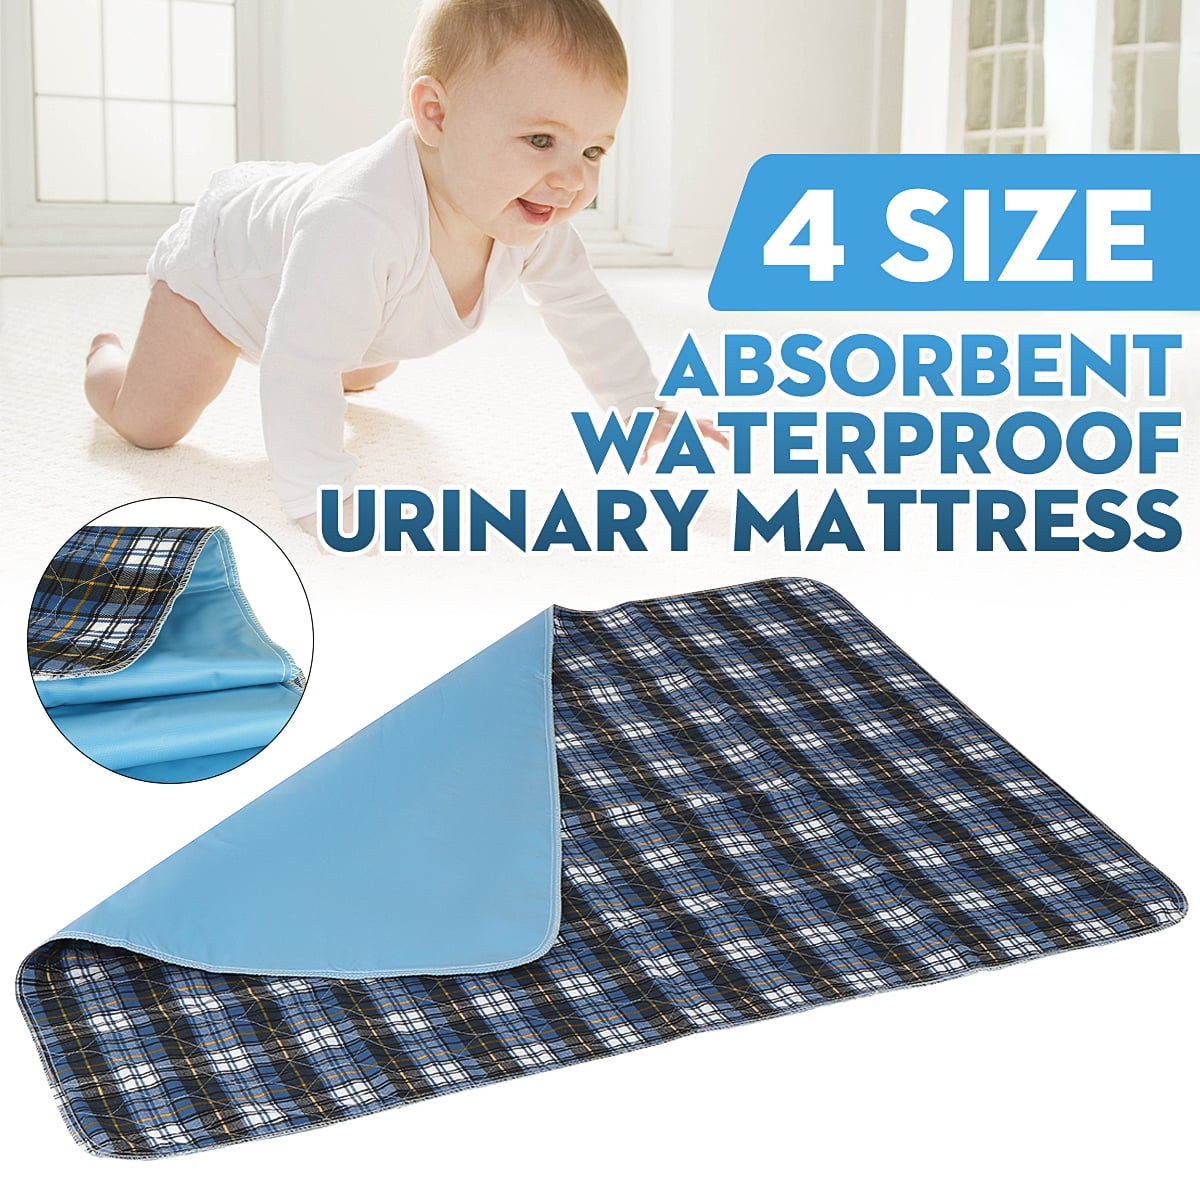 Bed Pads for Incontinence Washable Large (34 × 52), Reusable Waterproof  Bed Underpads with Non-Slip Back for Elderly, Kids, Women or Pets, Blue